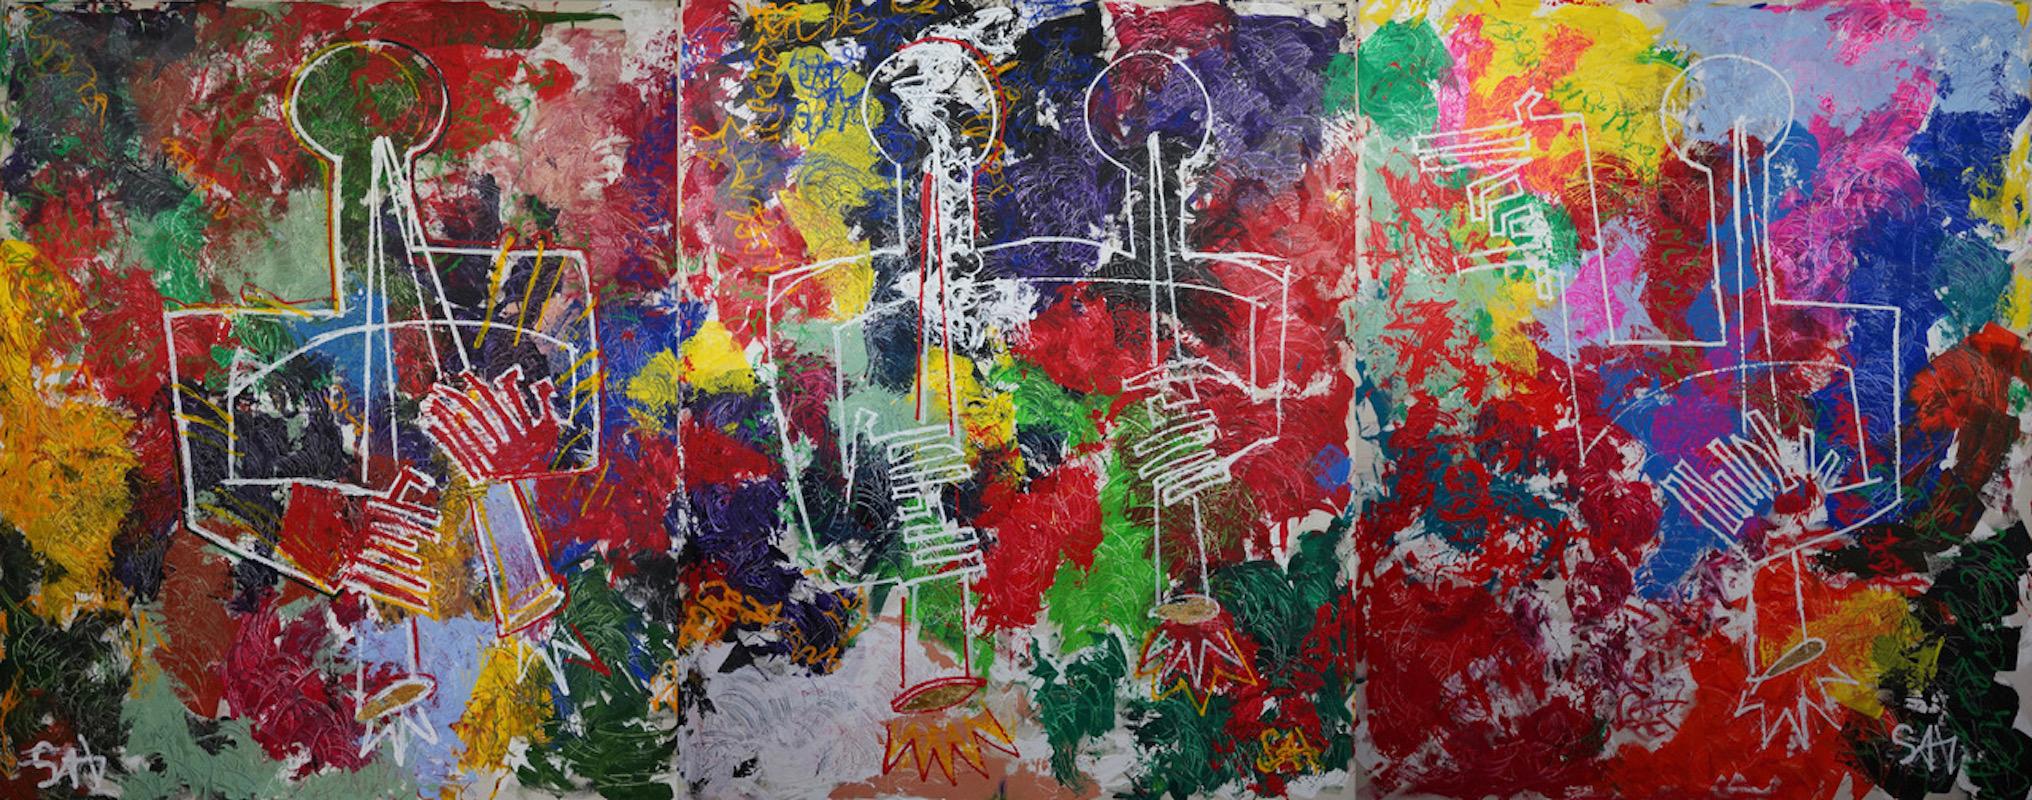 Sax Berlin Abstract Painting – The Pipers At The Dawn of Peace.  Große Contemporary Tryptch Abstrakte Malerei